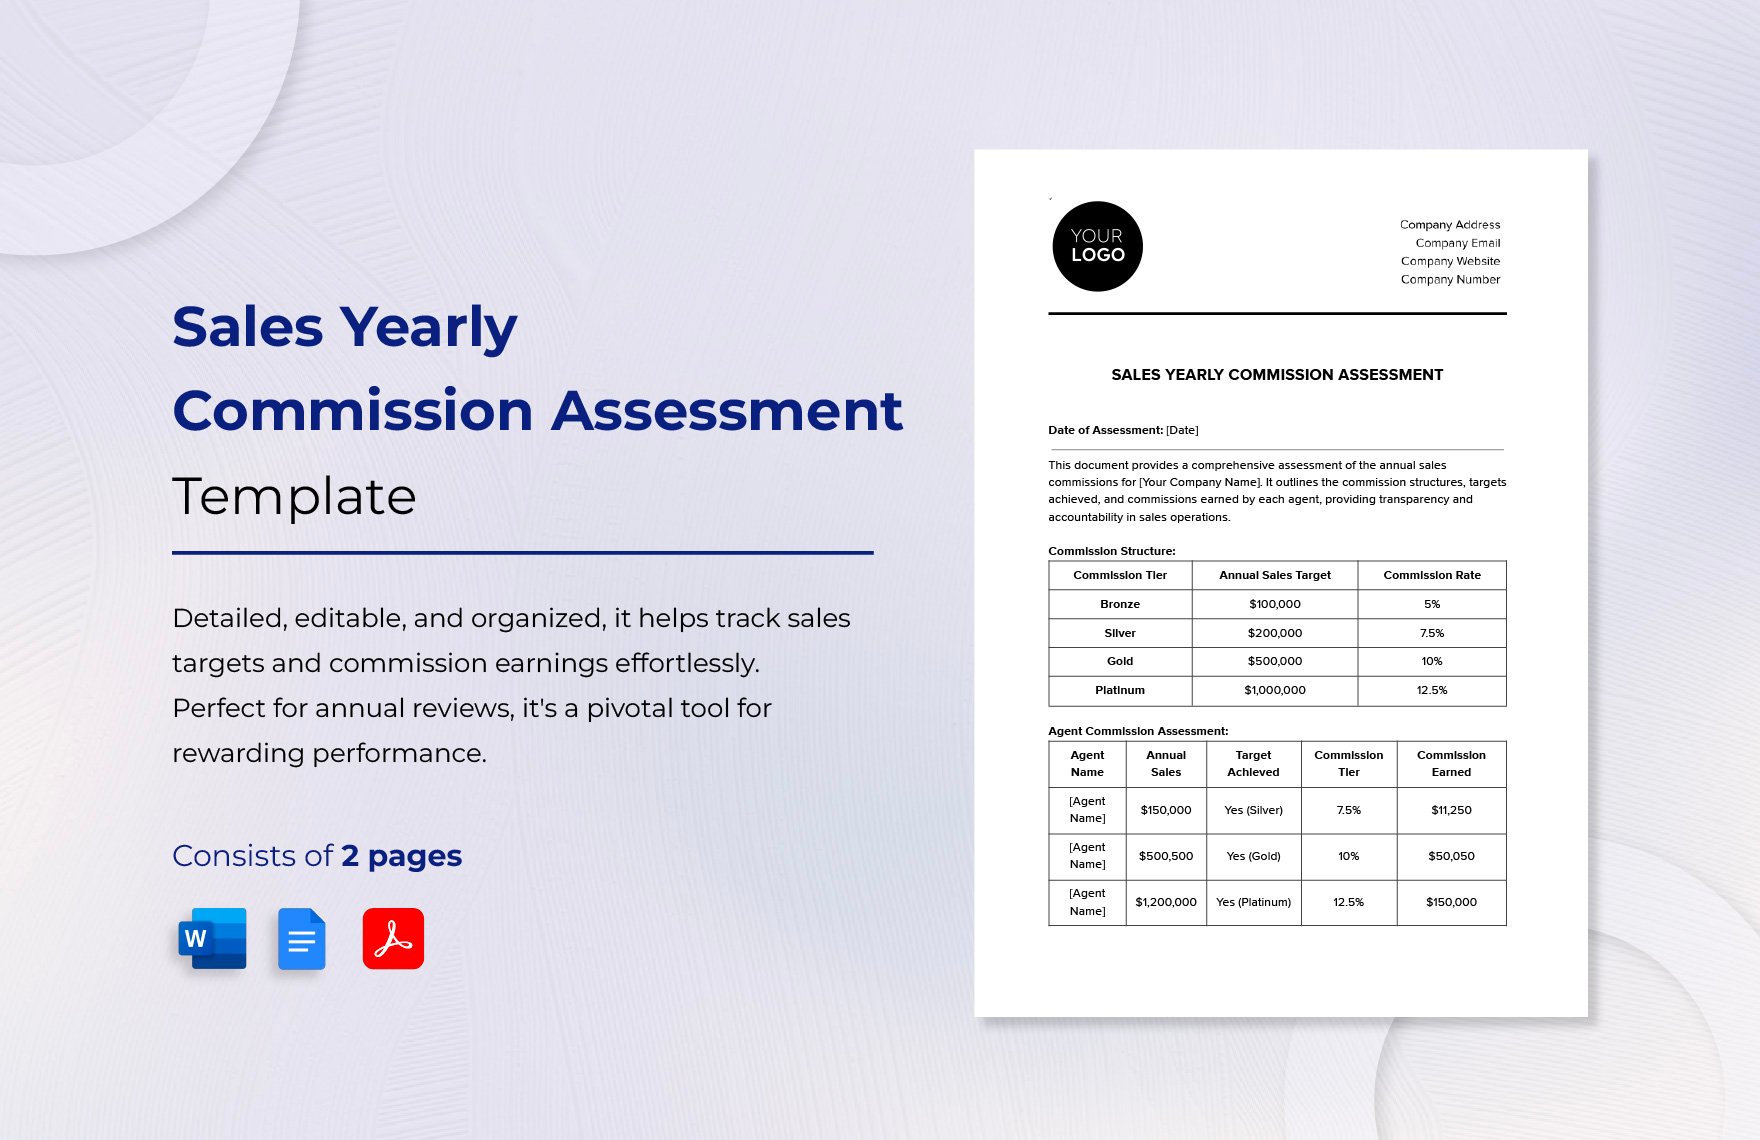 Sales Yearly Commission Assessment Template in Word, Google Docs, PDF